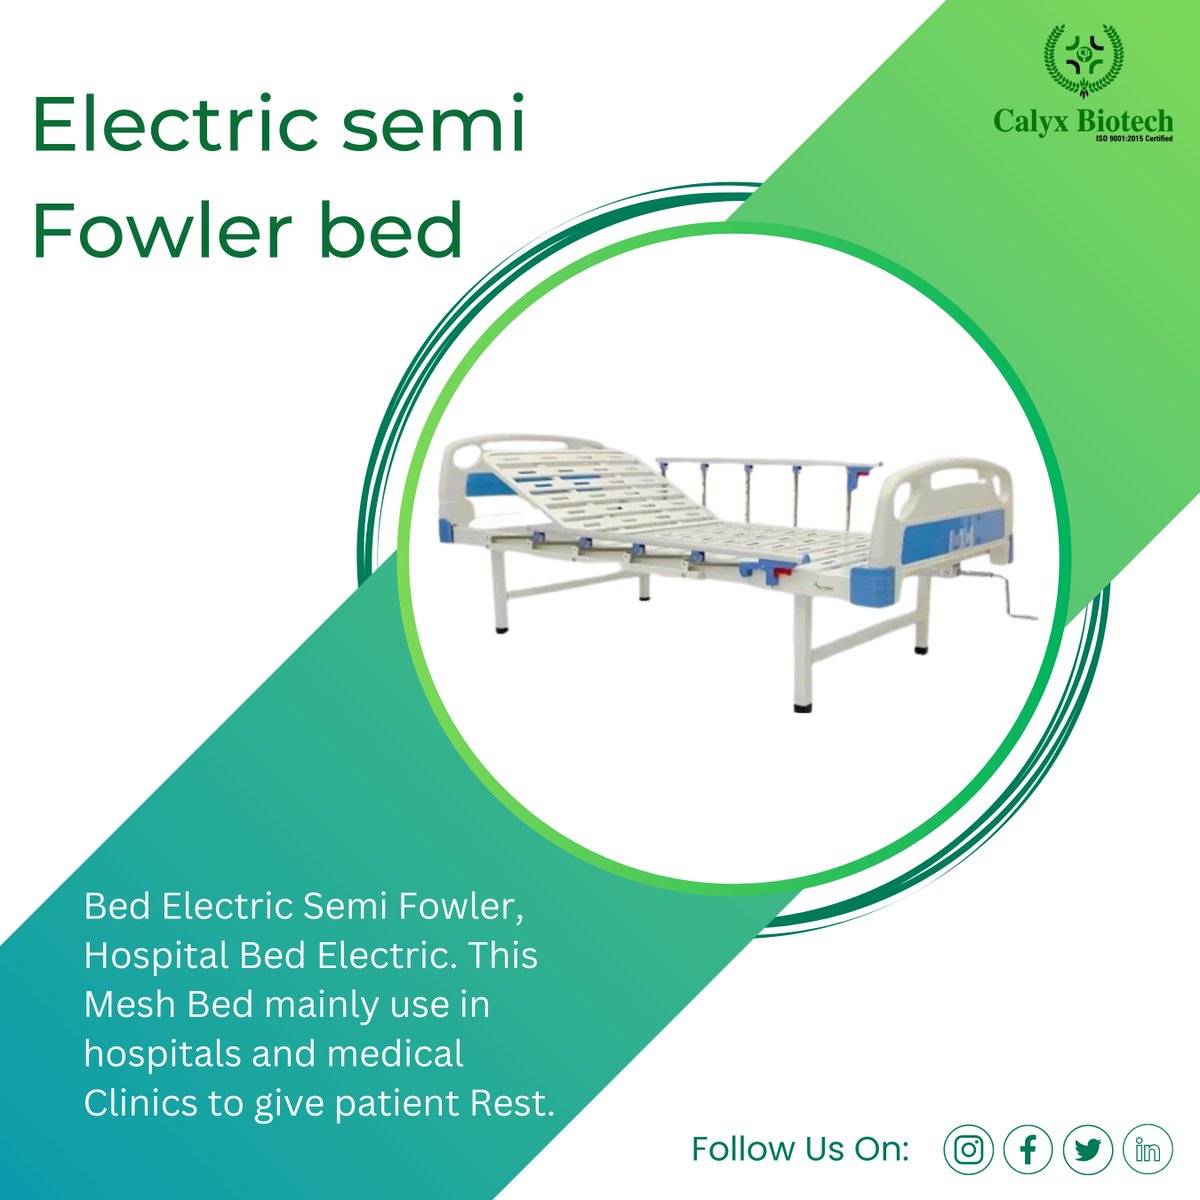 As a leading manufacturer and supplier in the healthcare industry, the Calyx Biotech Electric Semi Fowler Bed is designed to provide patients with a comfortable resting solution during their recovery

.

.

#calyxbiotech #ElectricSemiFowlerBed #HospitalBed #MedicalEquipment